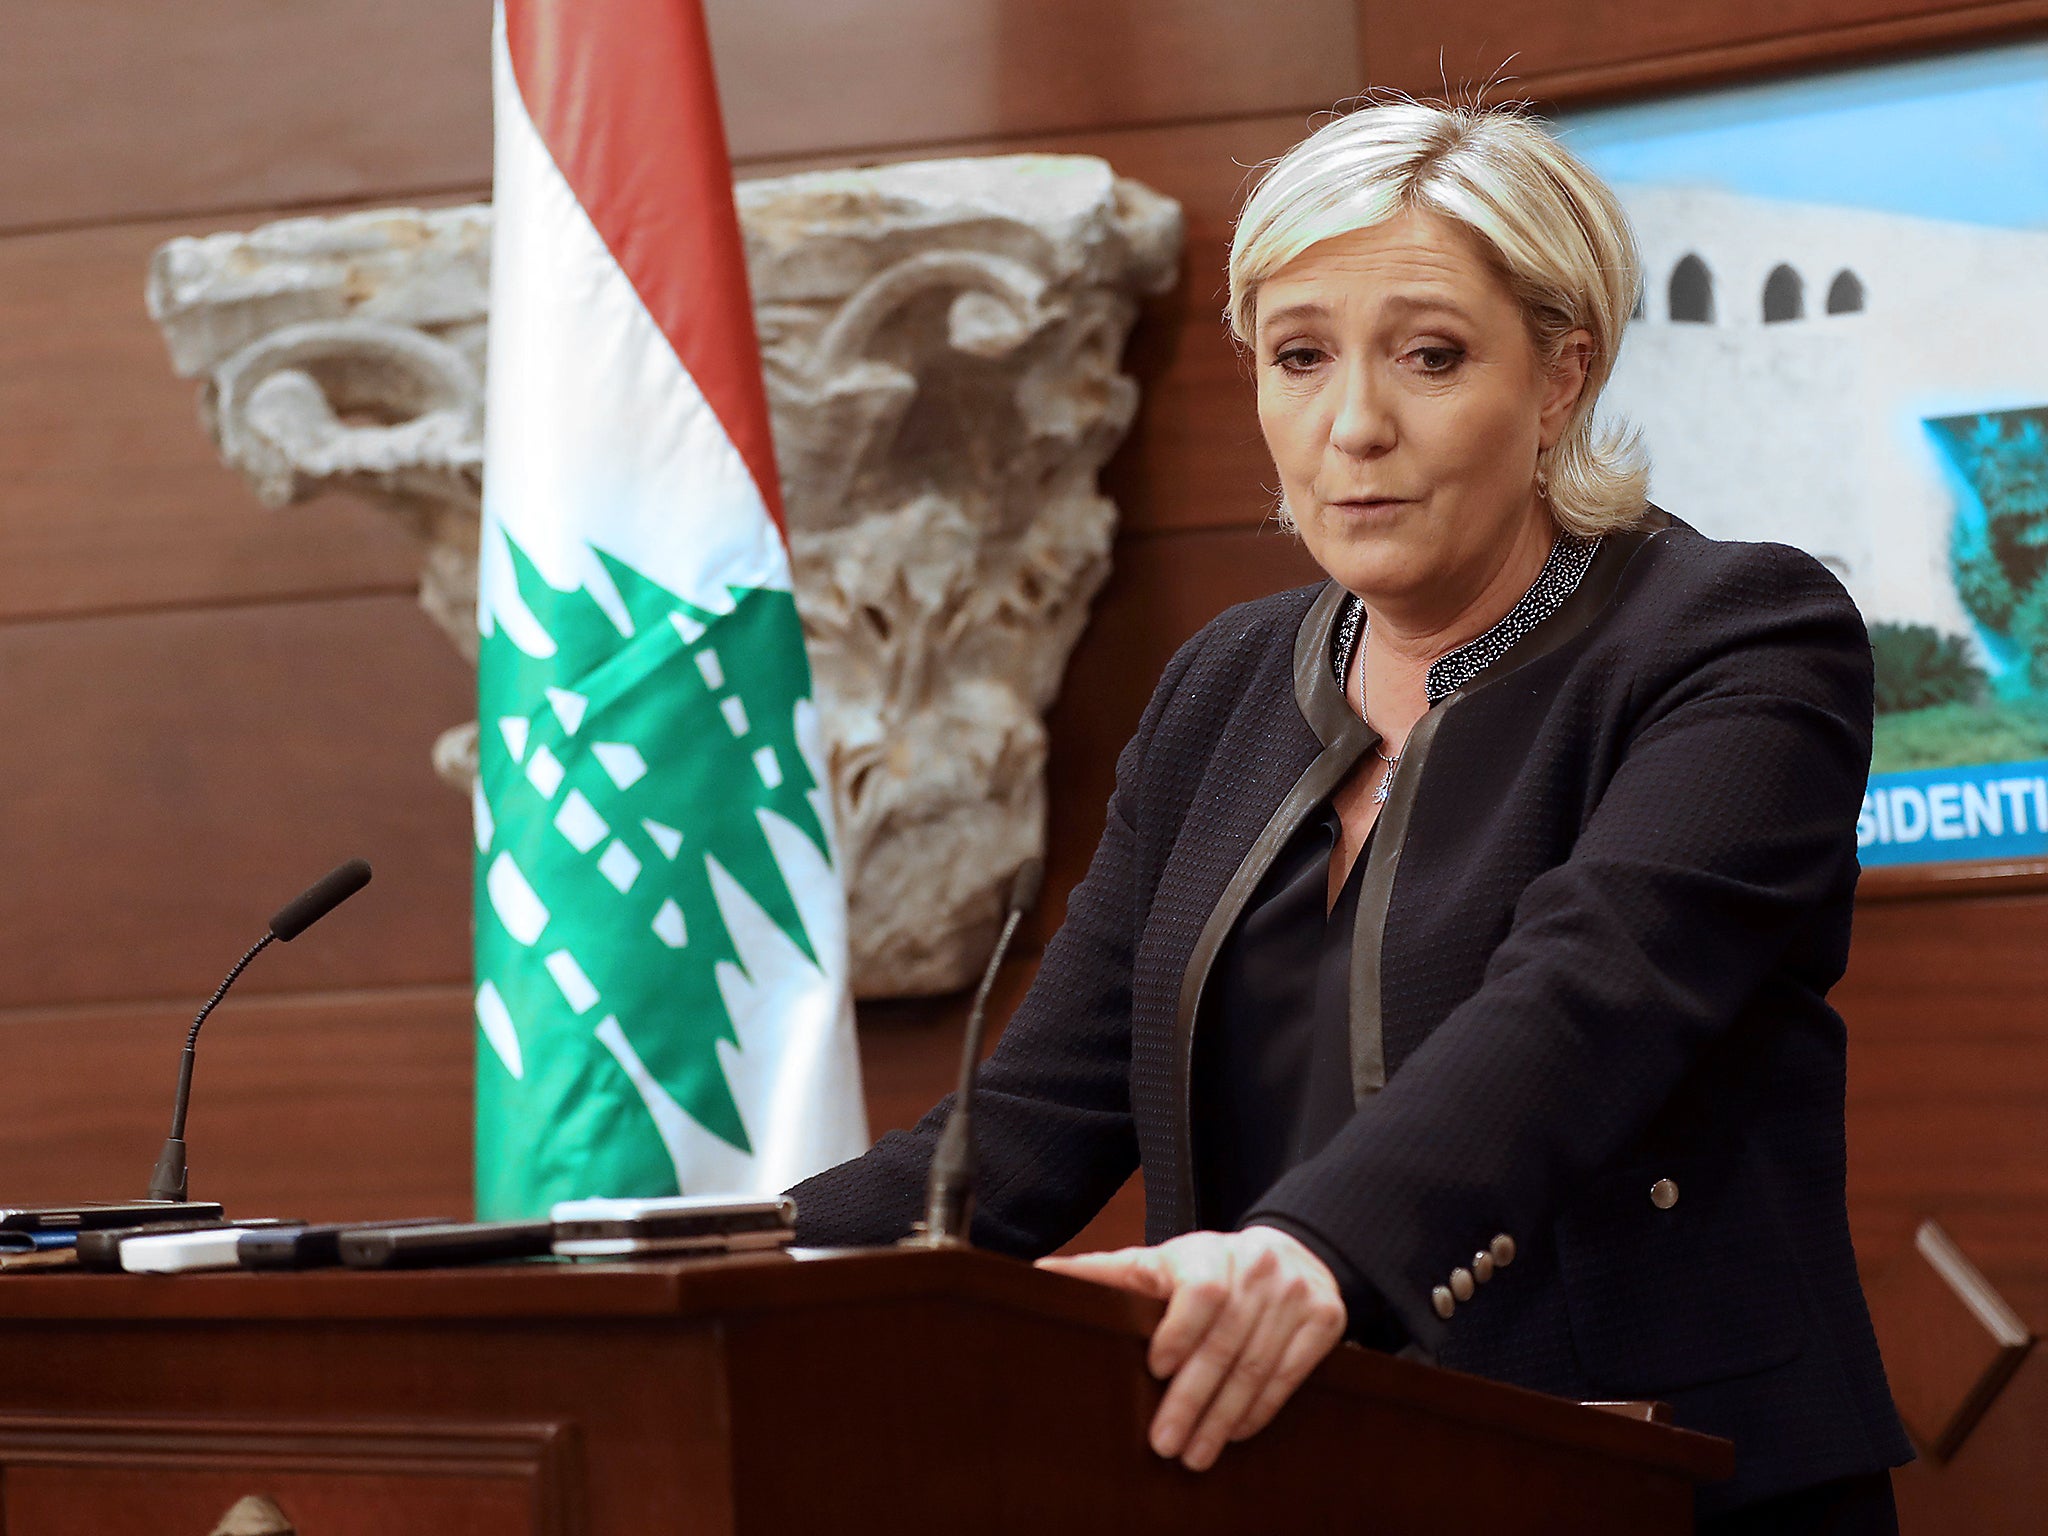 The French far-right leader speaks during a press conference at the presidential palace in Lebanon